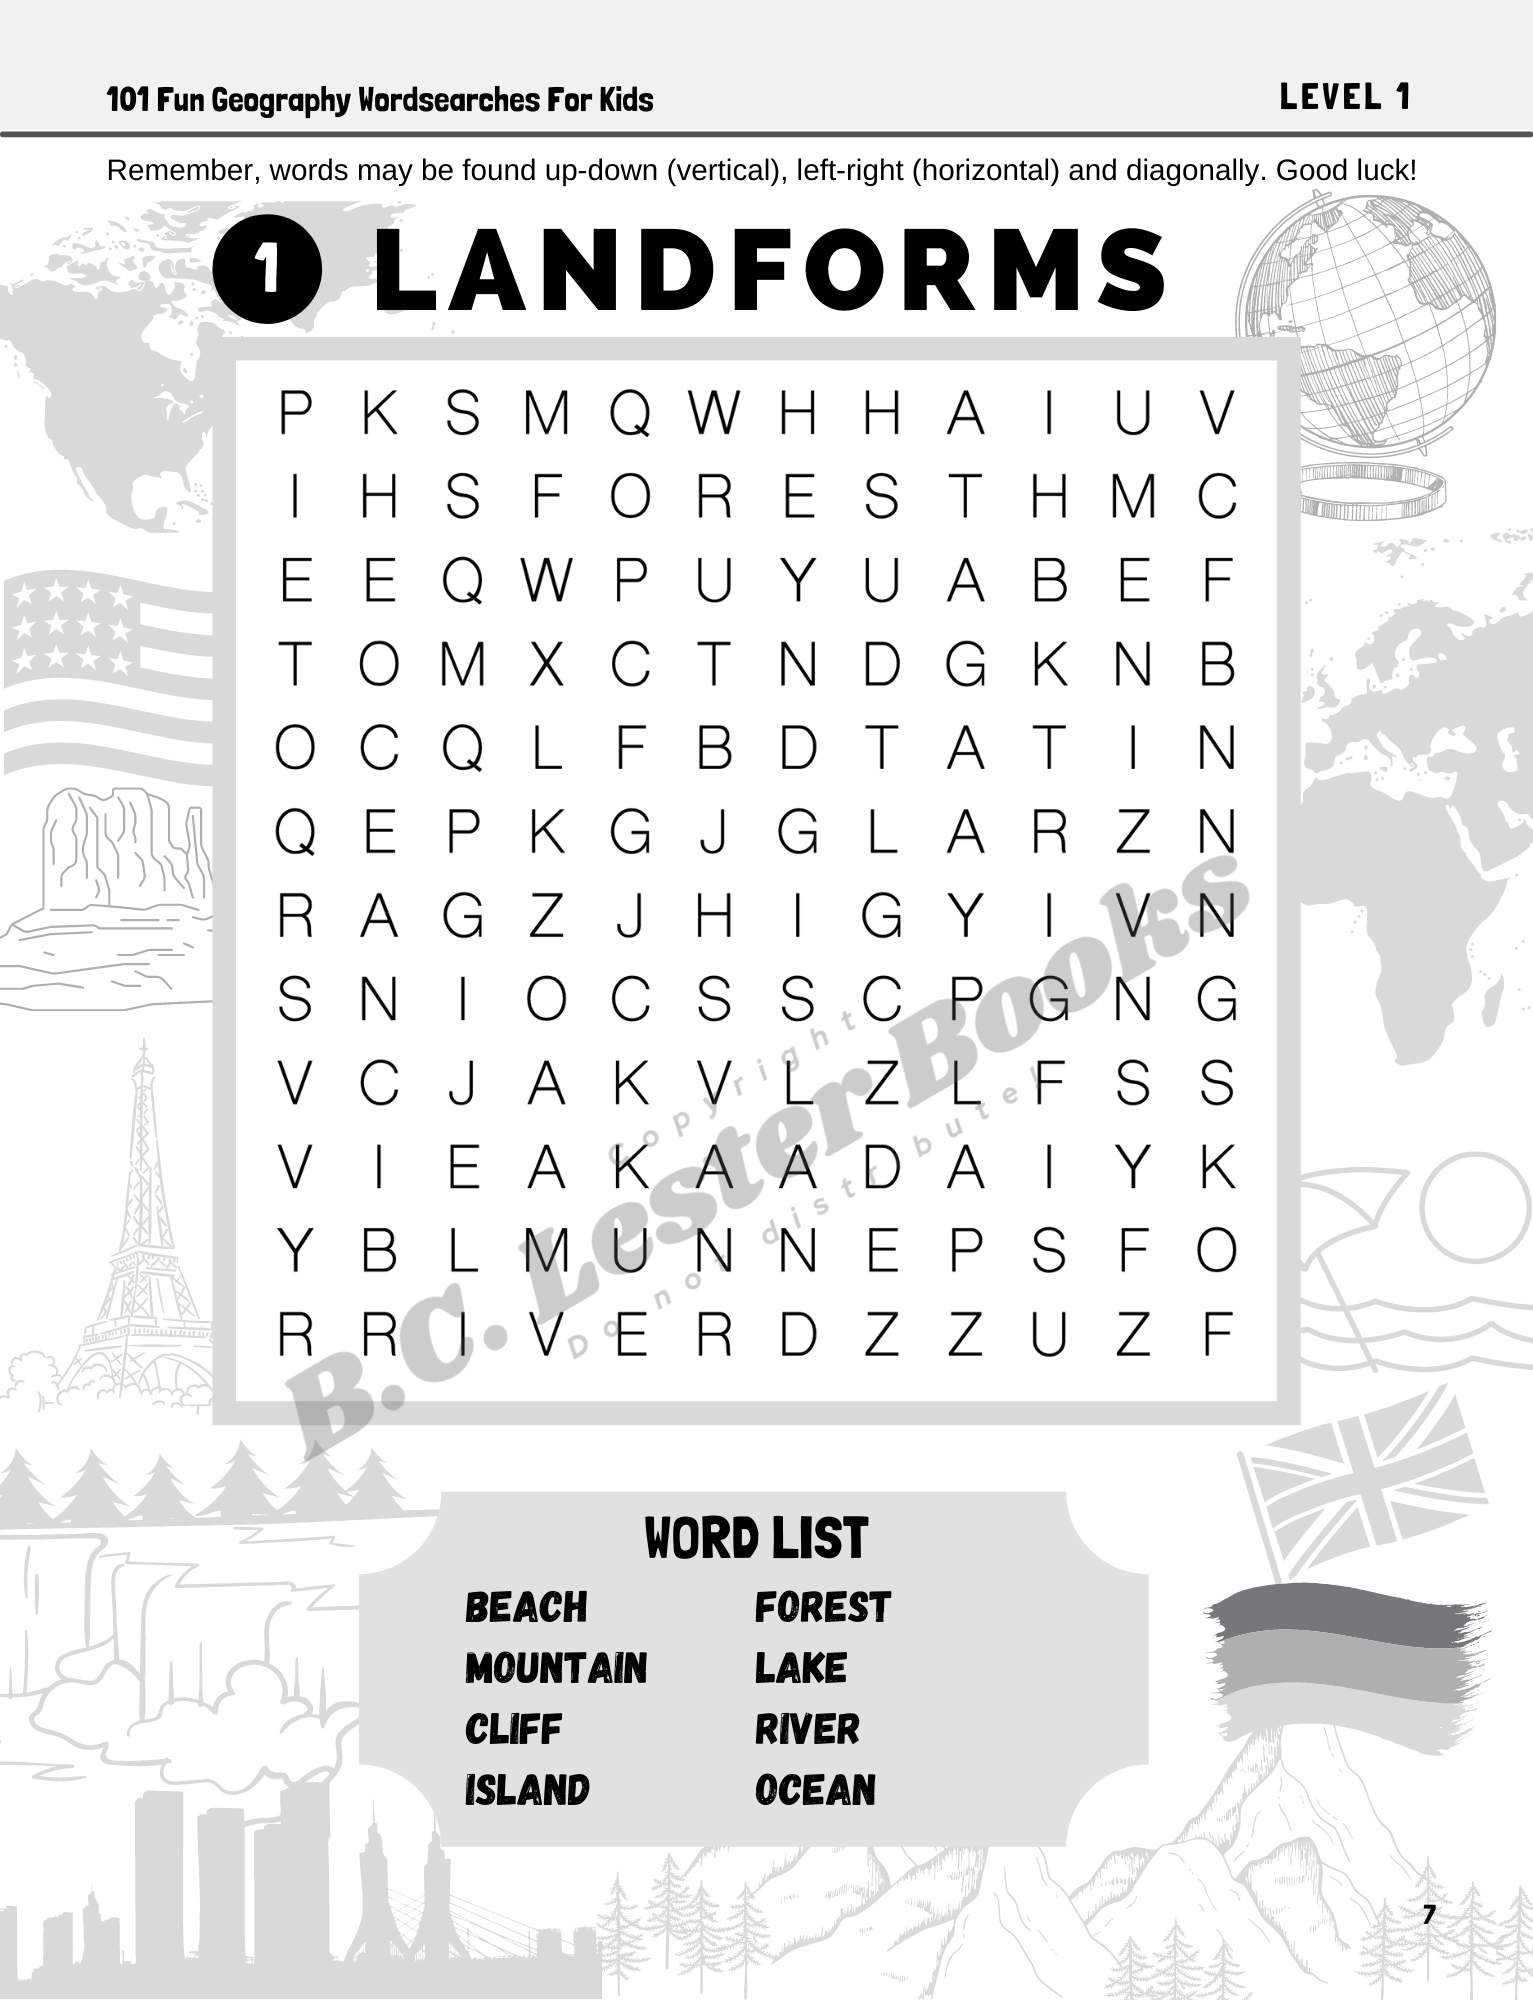 101 Fun Geography Wordsearches For Kids B.C. Lester Books